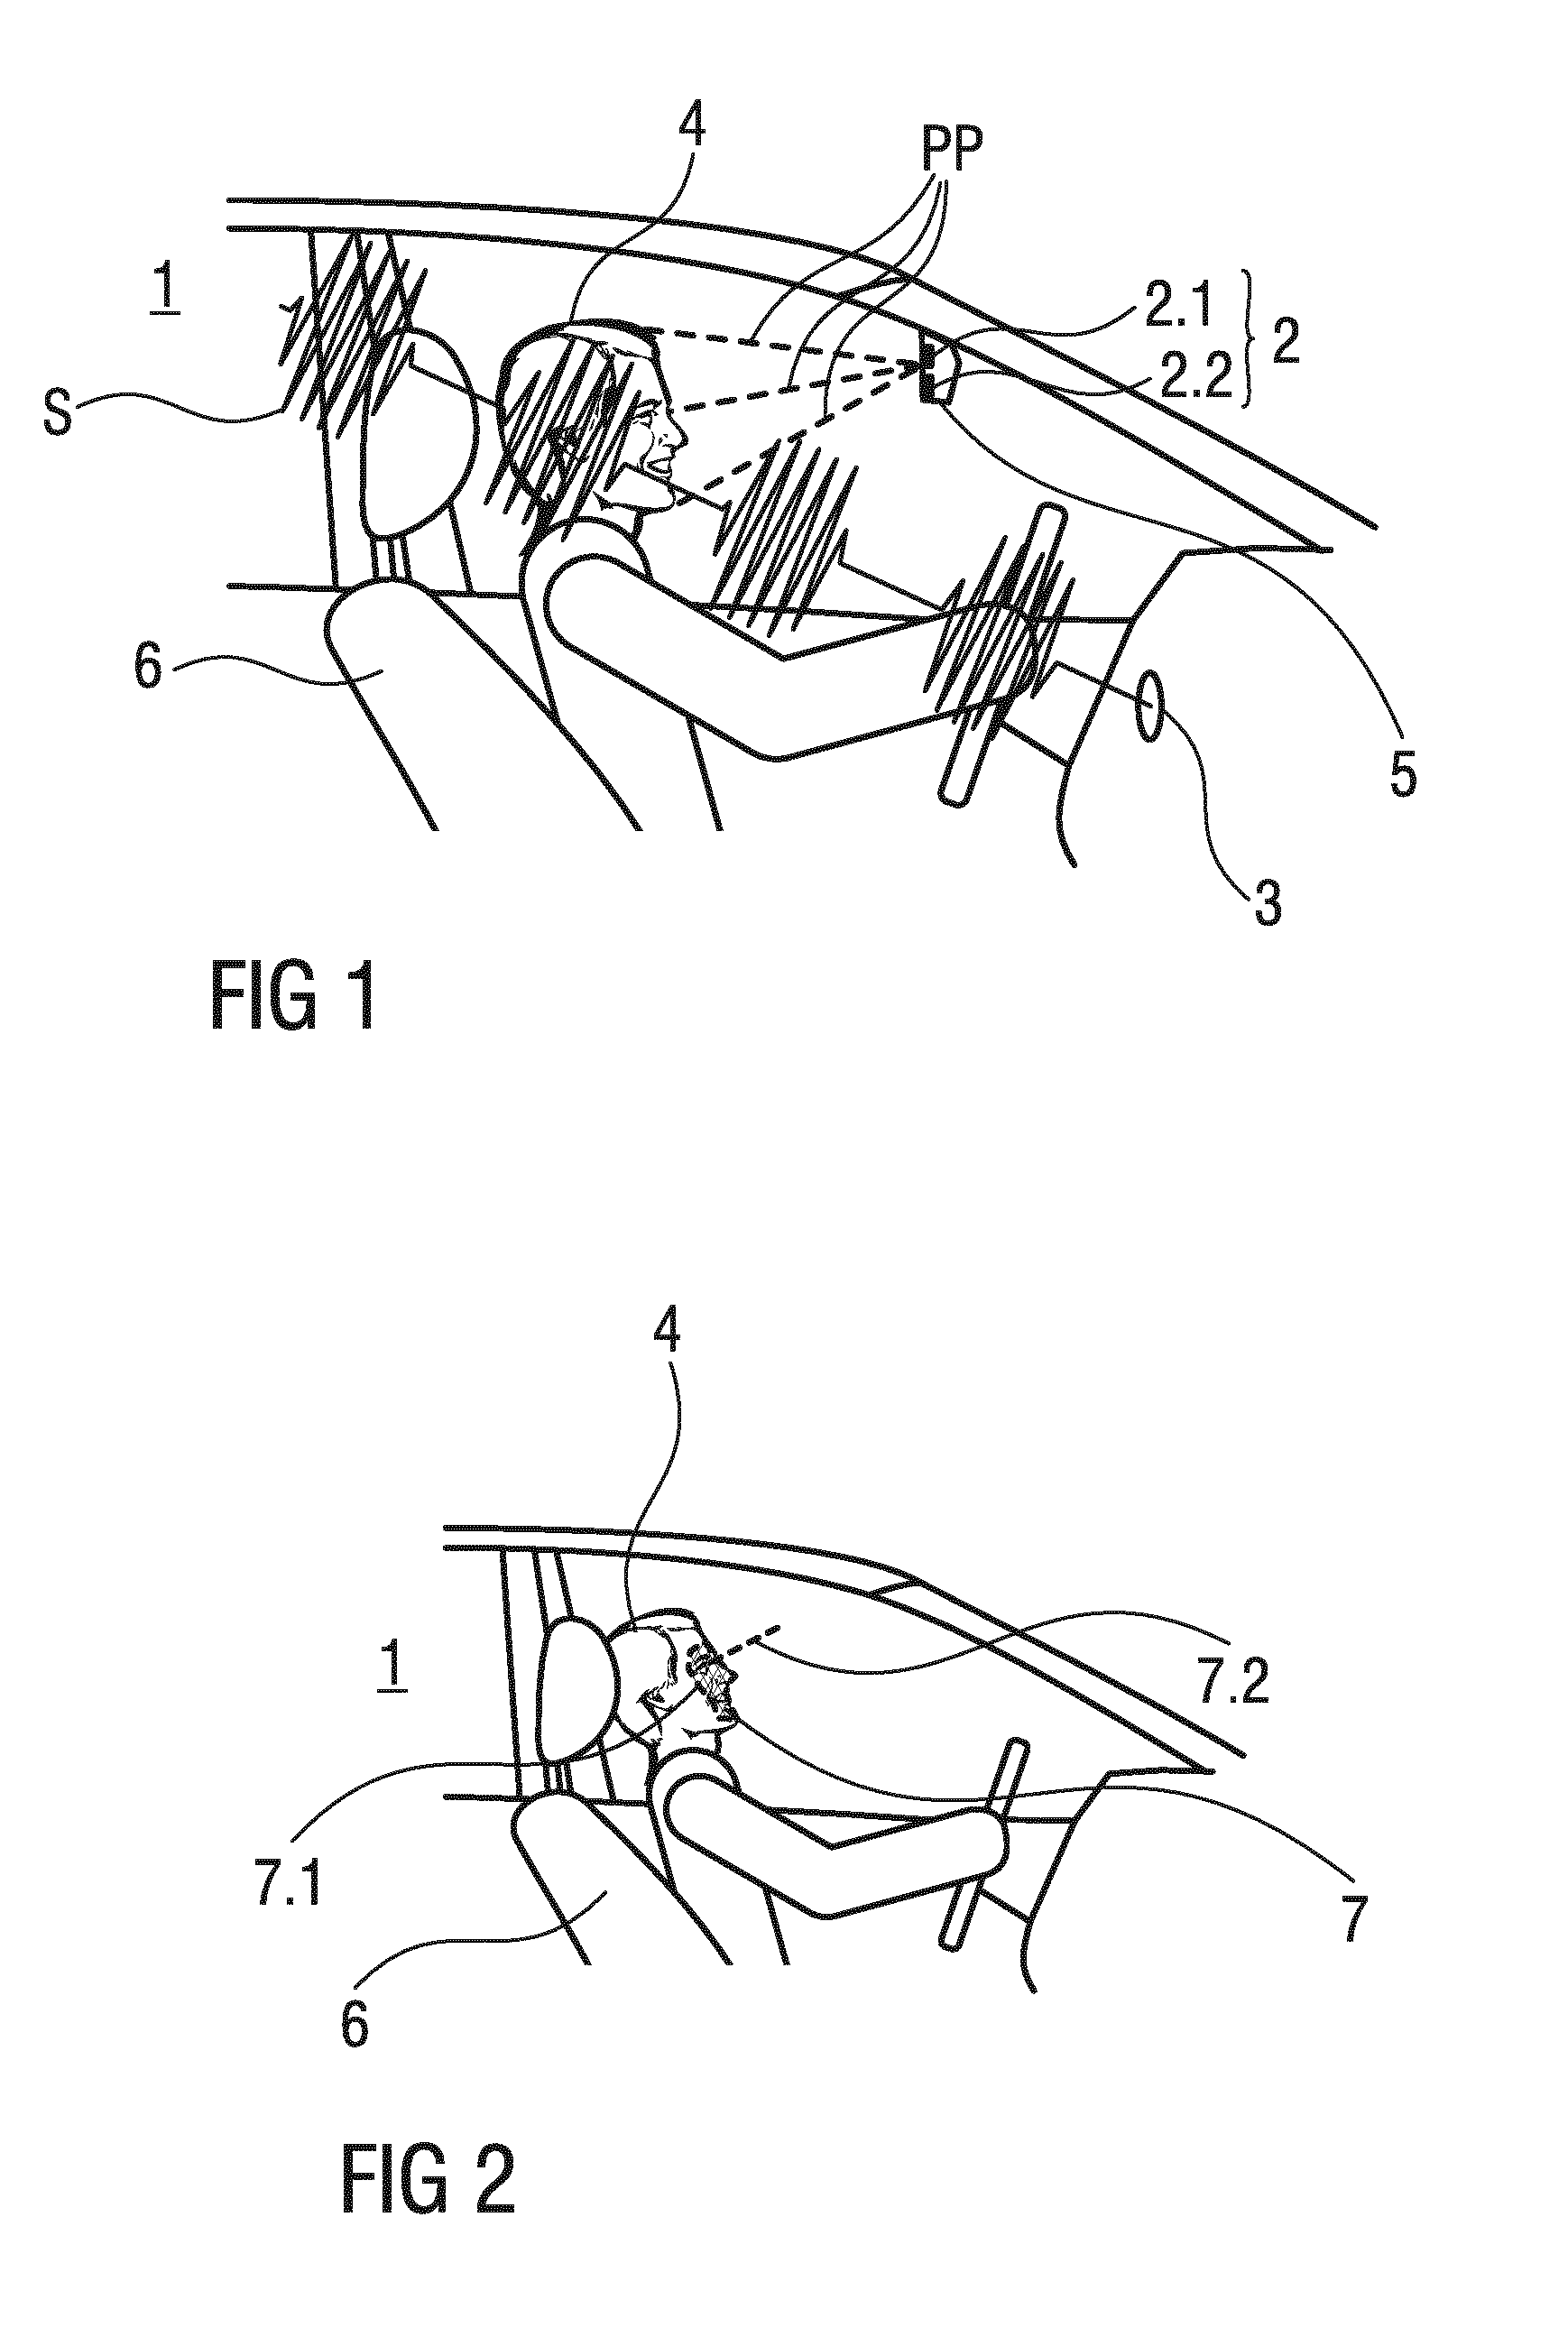 Method and apparatus for monitoring and control alertness of a driver